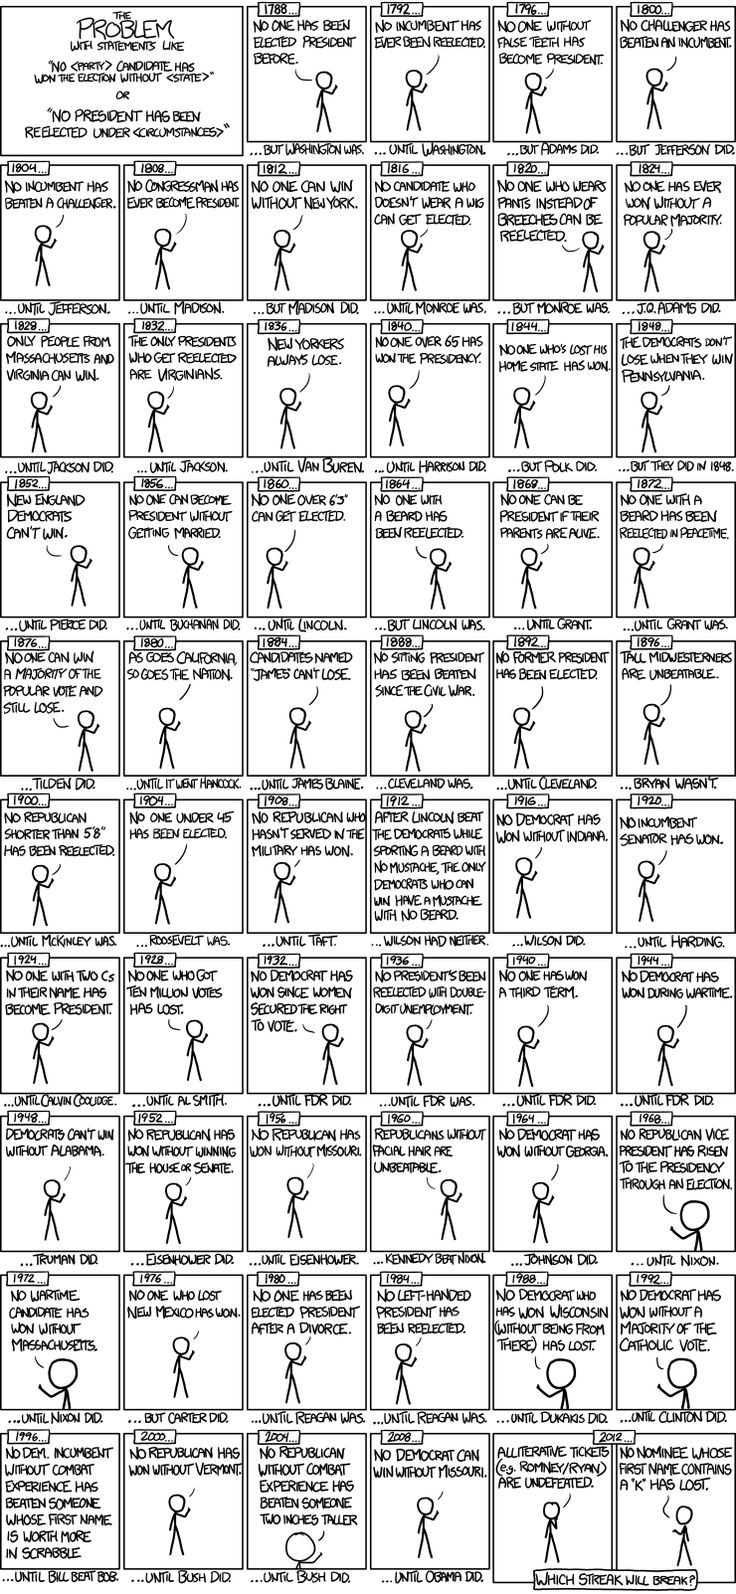 Alas there are 20 more days to go so to kill a few minutes here are some cartoon anecdotes of previous presidential precedents courtesy of XKCD